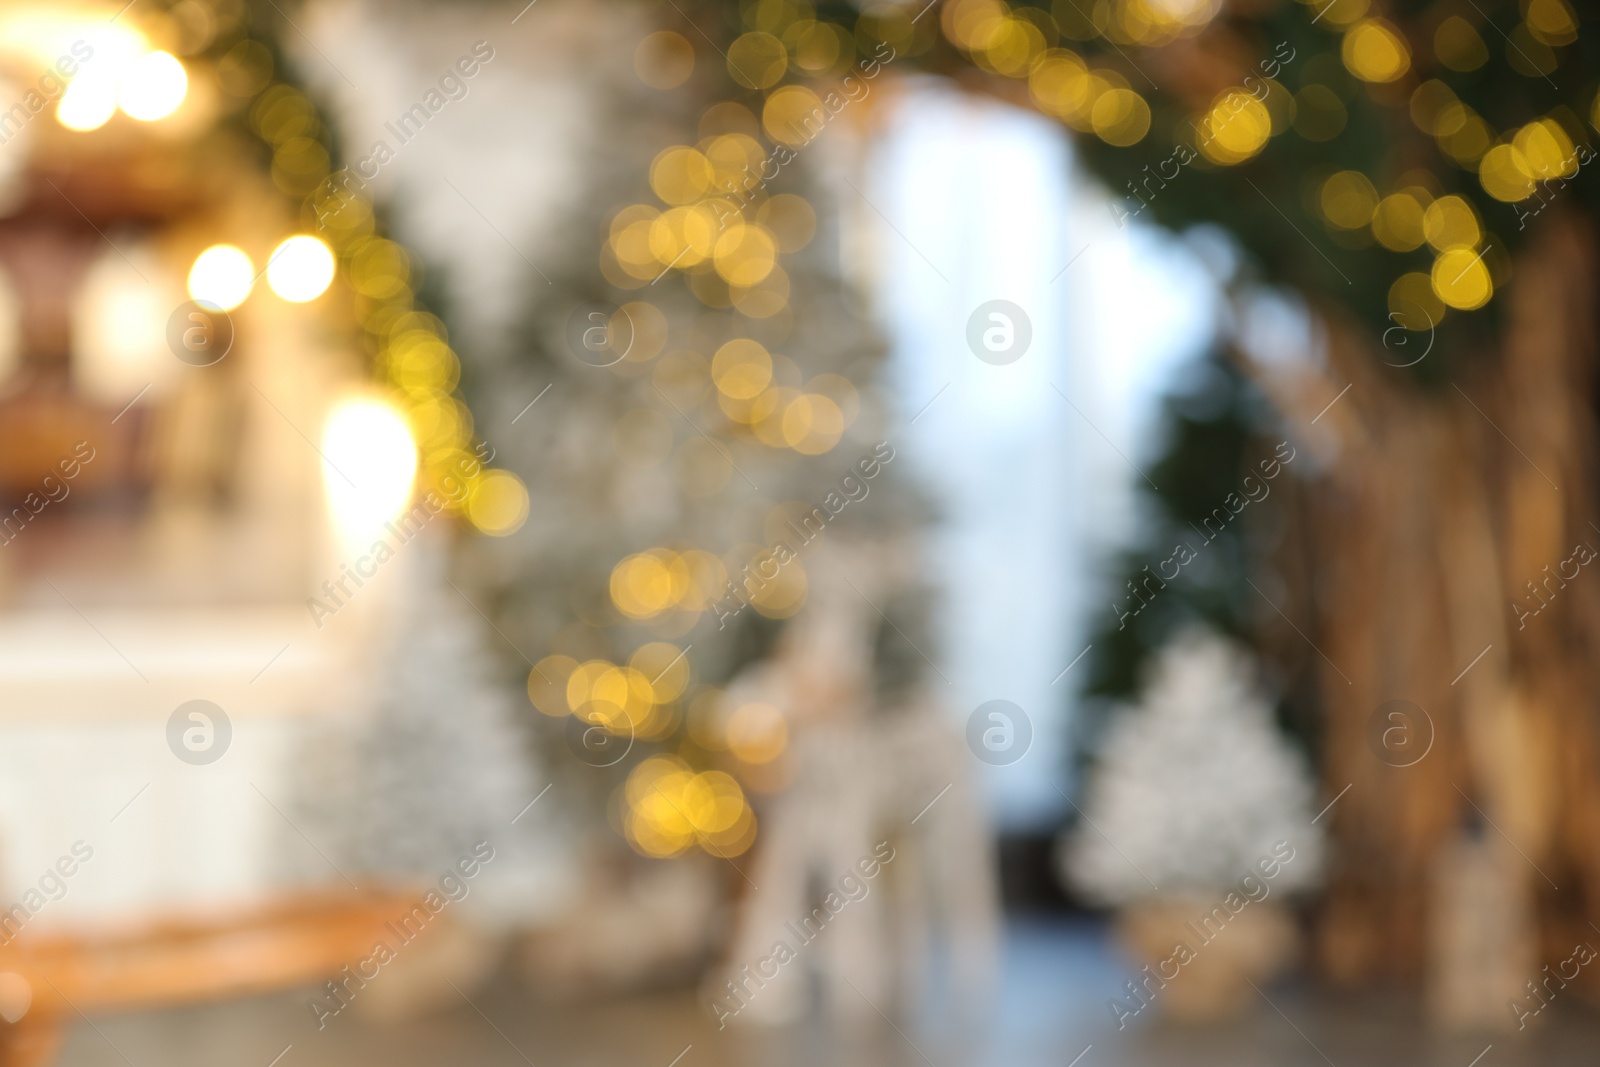 Photo of Blurred view of stylish room interior with Christmas tree and festive decor